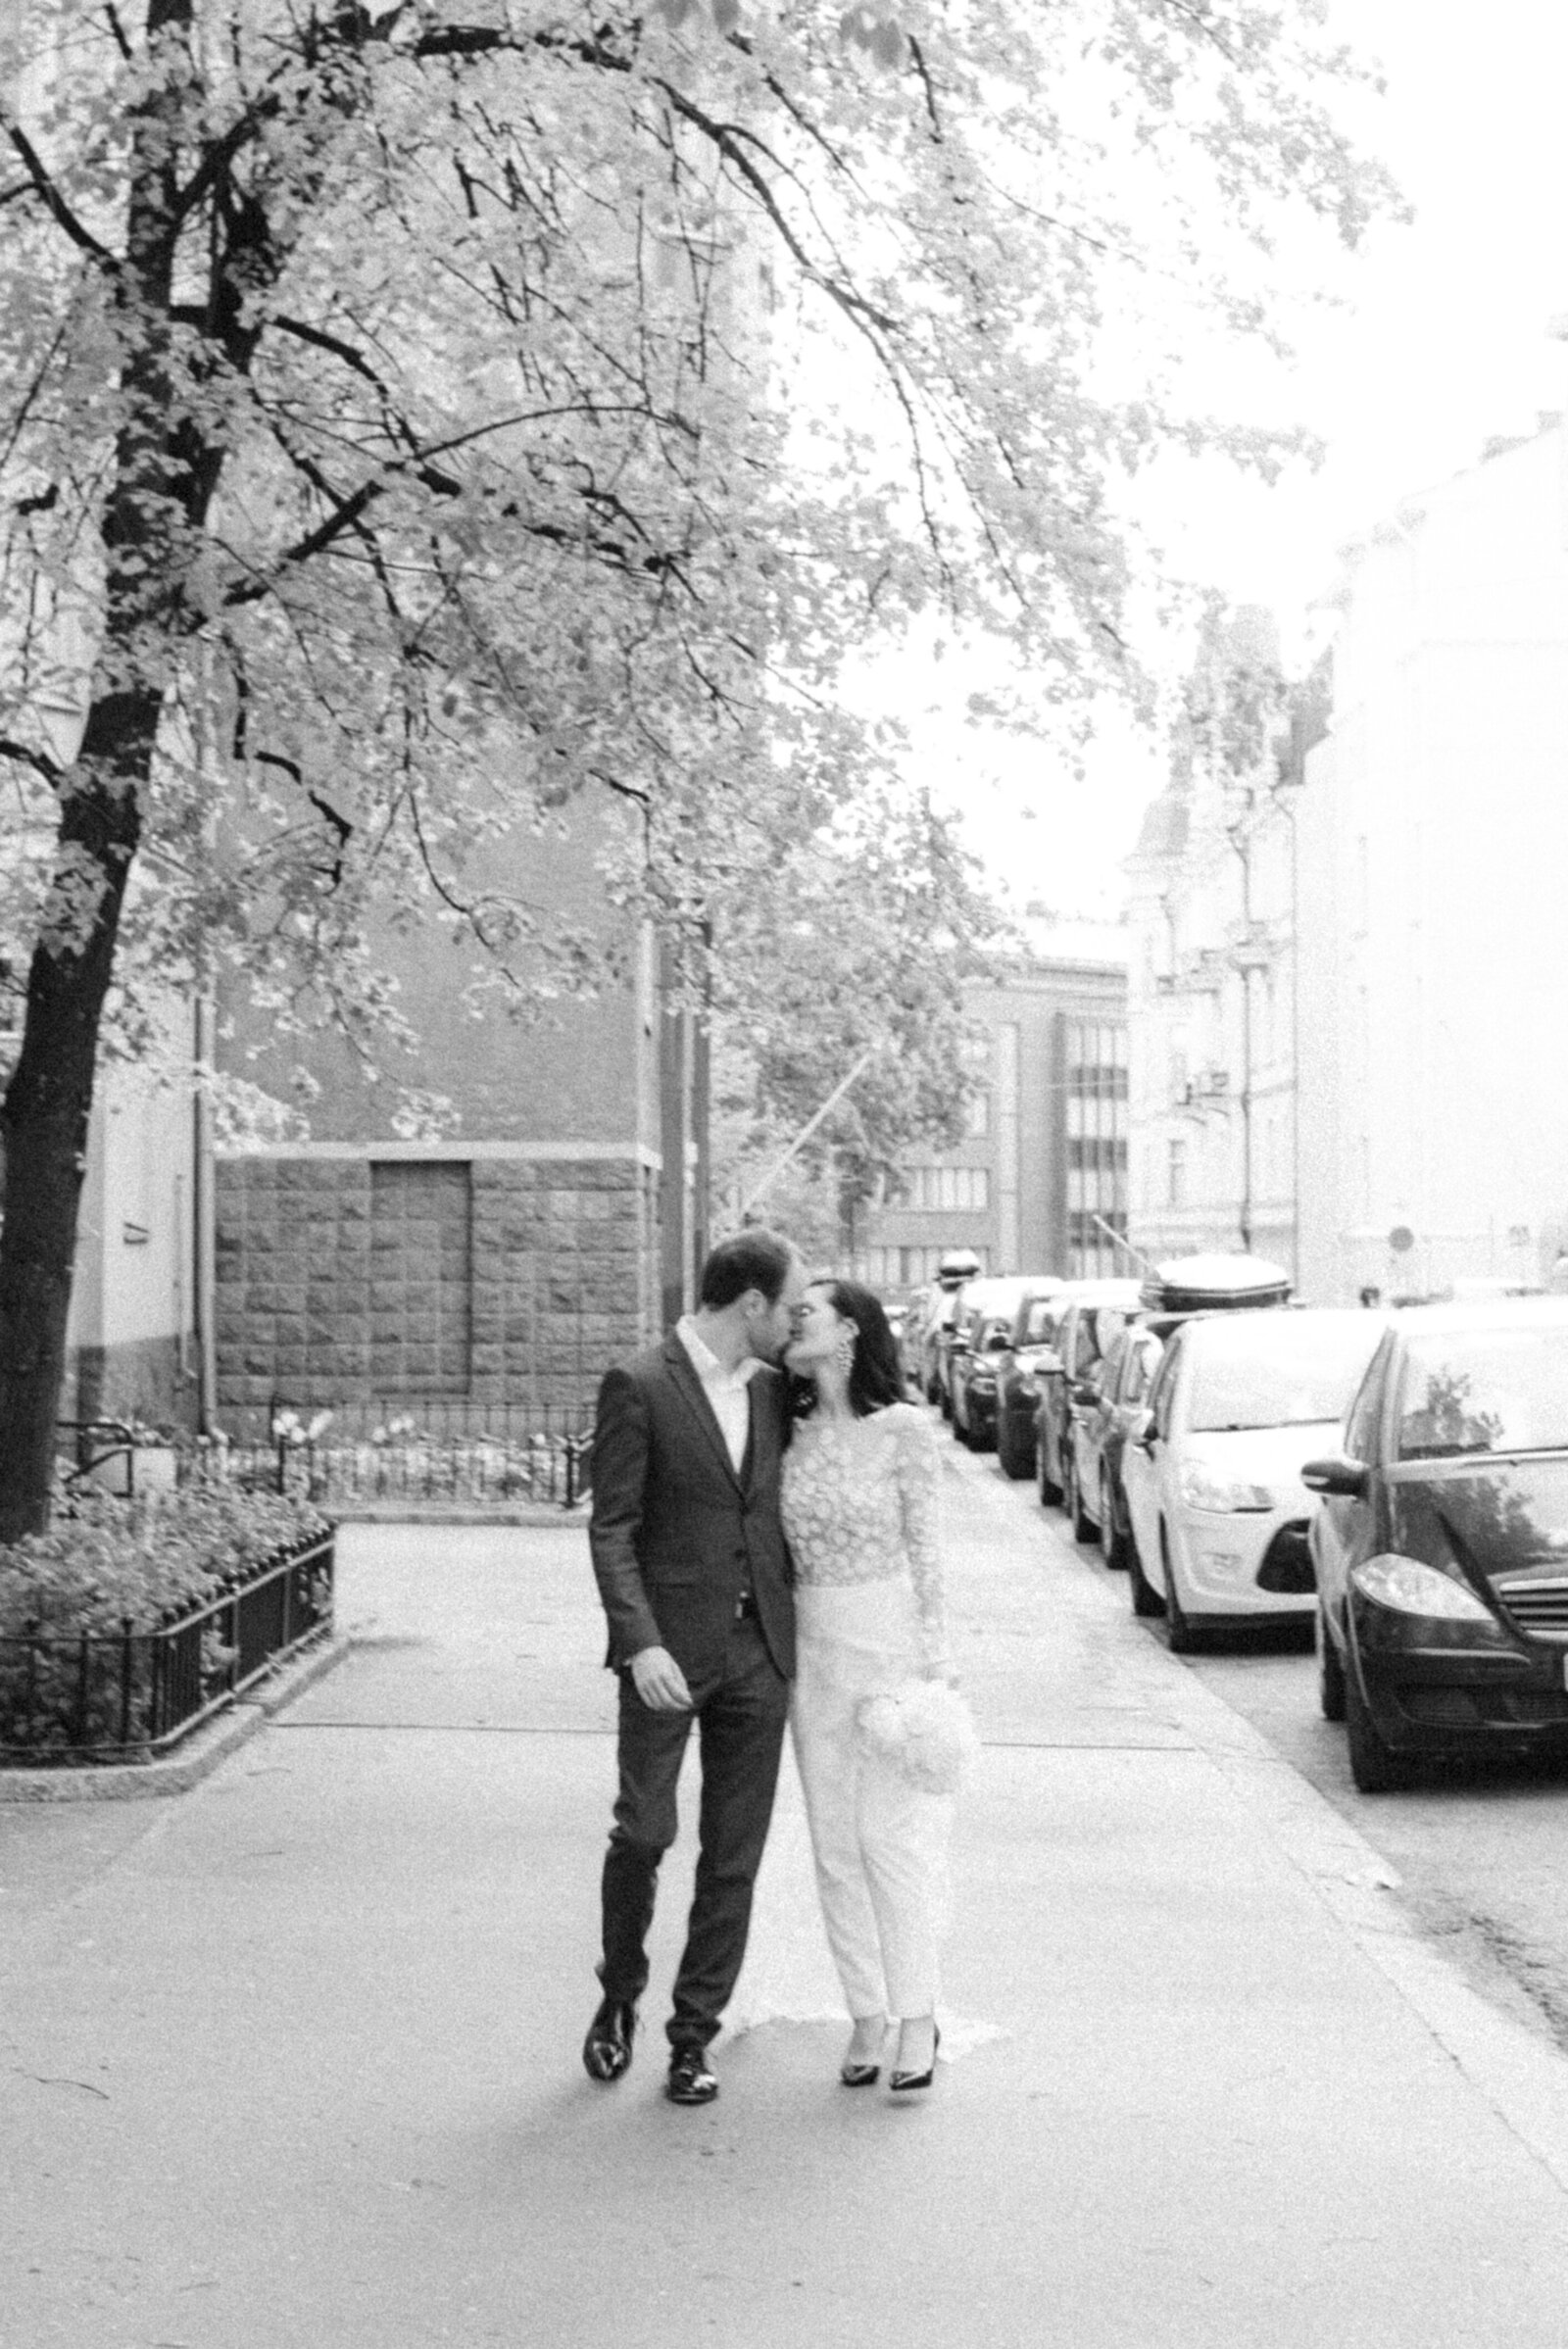 Deep emotions captured by a nordic wedding photographer Hannika Gabrielsson in Helsinki. A wedding couple is kissing on the street in an urban elopement photograph.